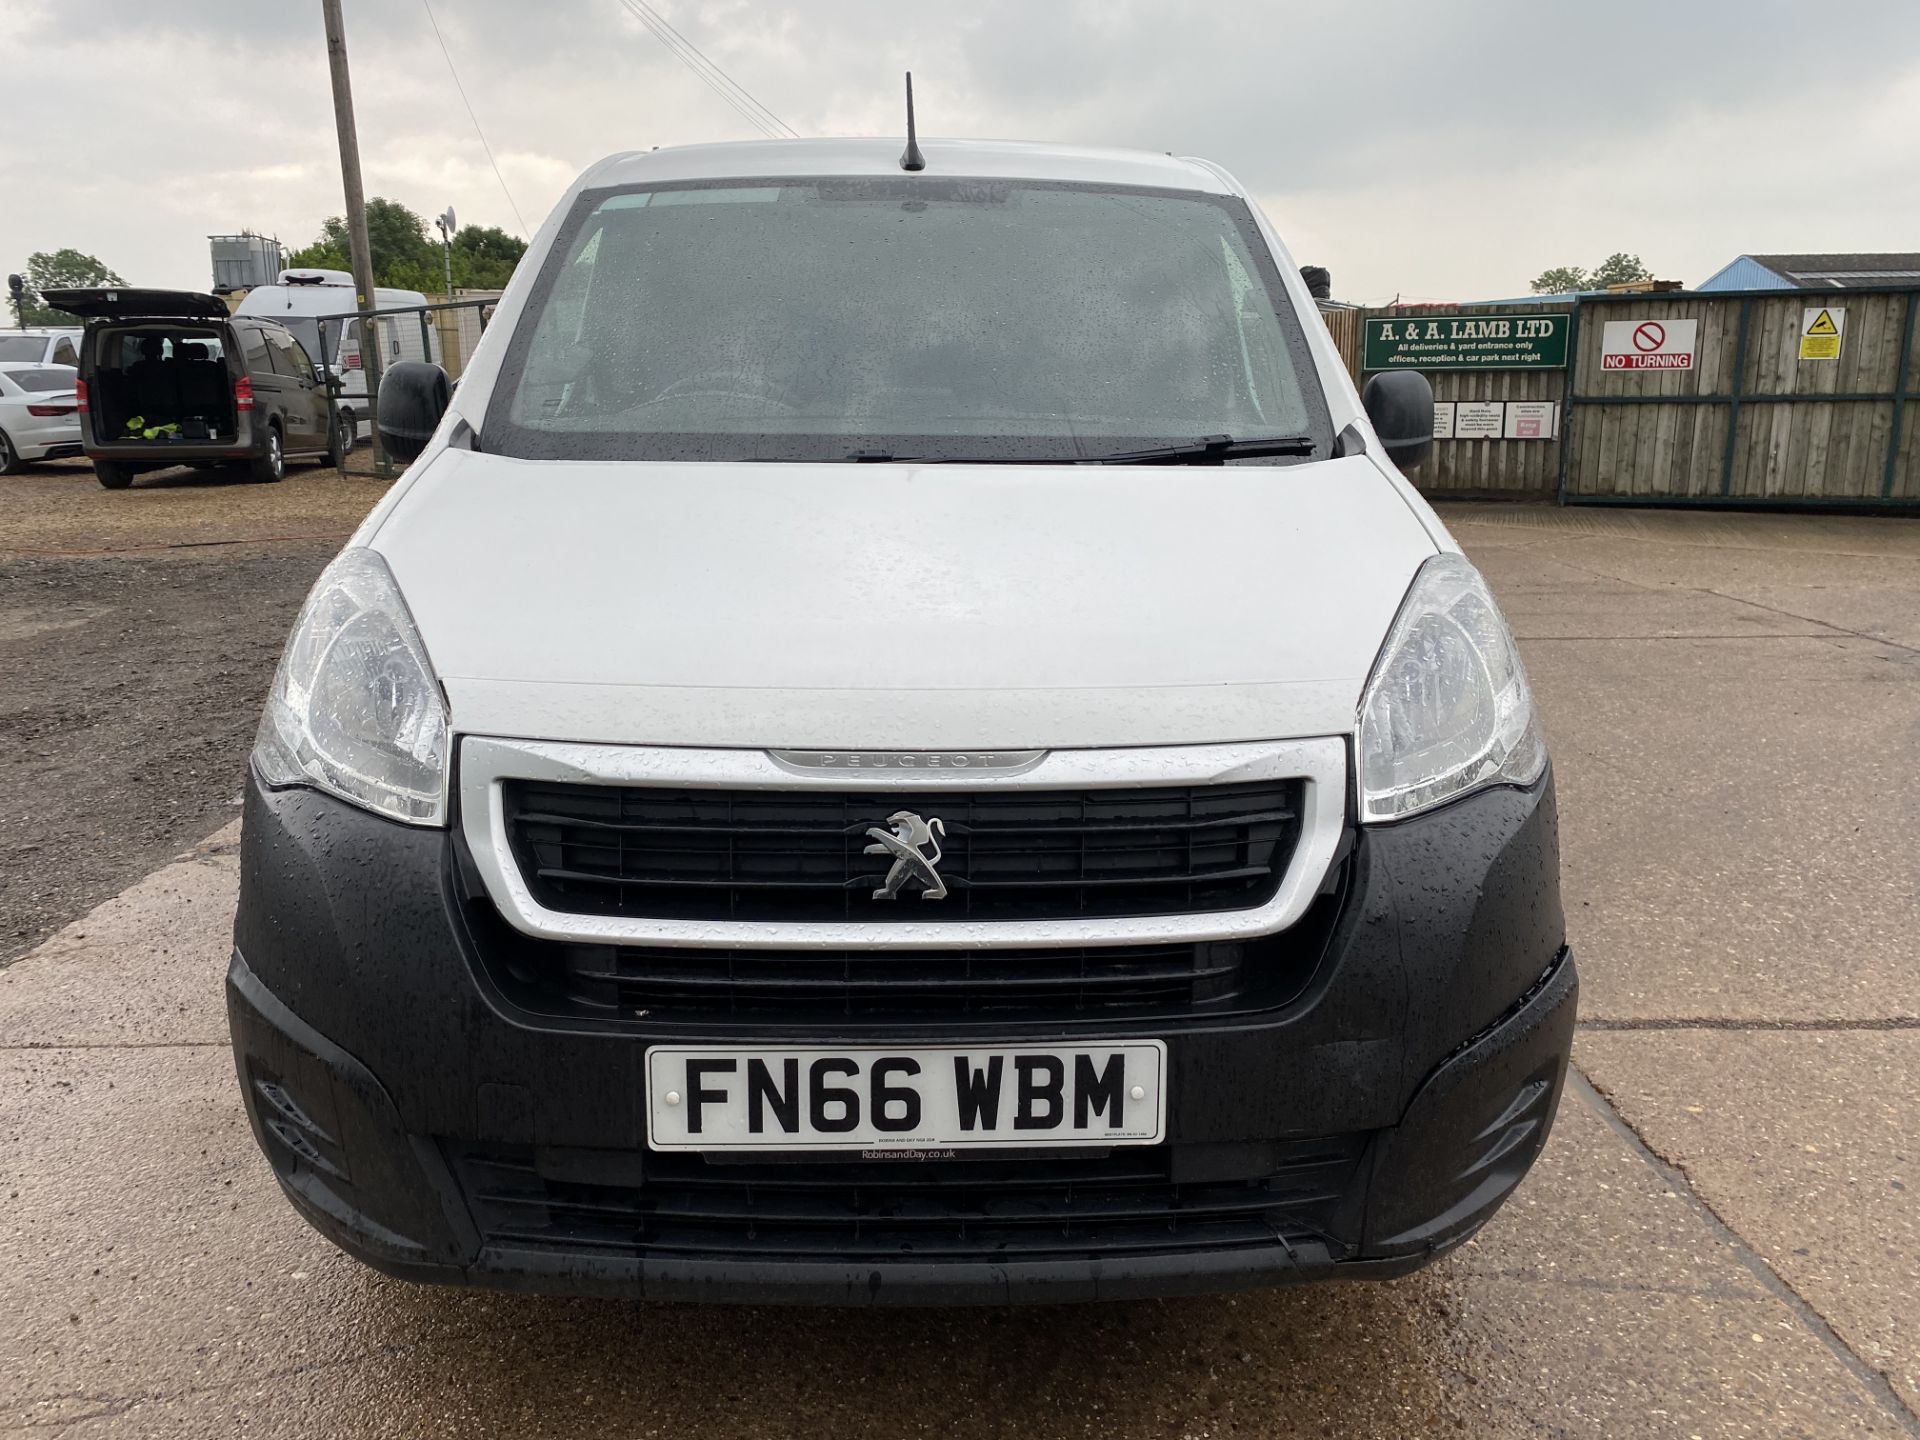 PEUGEOT PARTNER 1.6HDI (100) BLUE "EURO 6' PROFESSIONAL MODEL - 2017 MODEL - 1 KEEPER - AIR CON !!! - Image 3 of 17